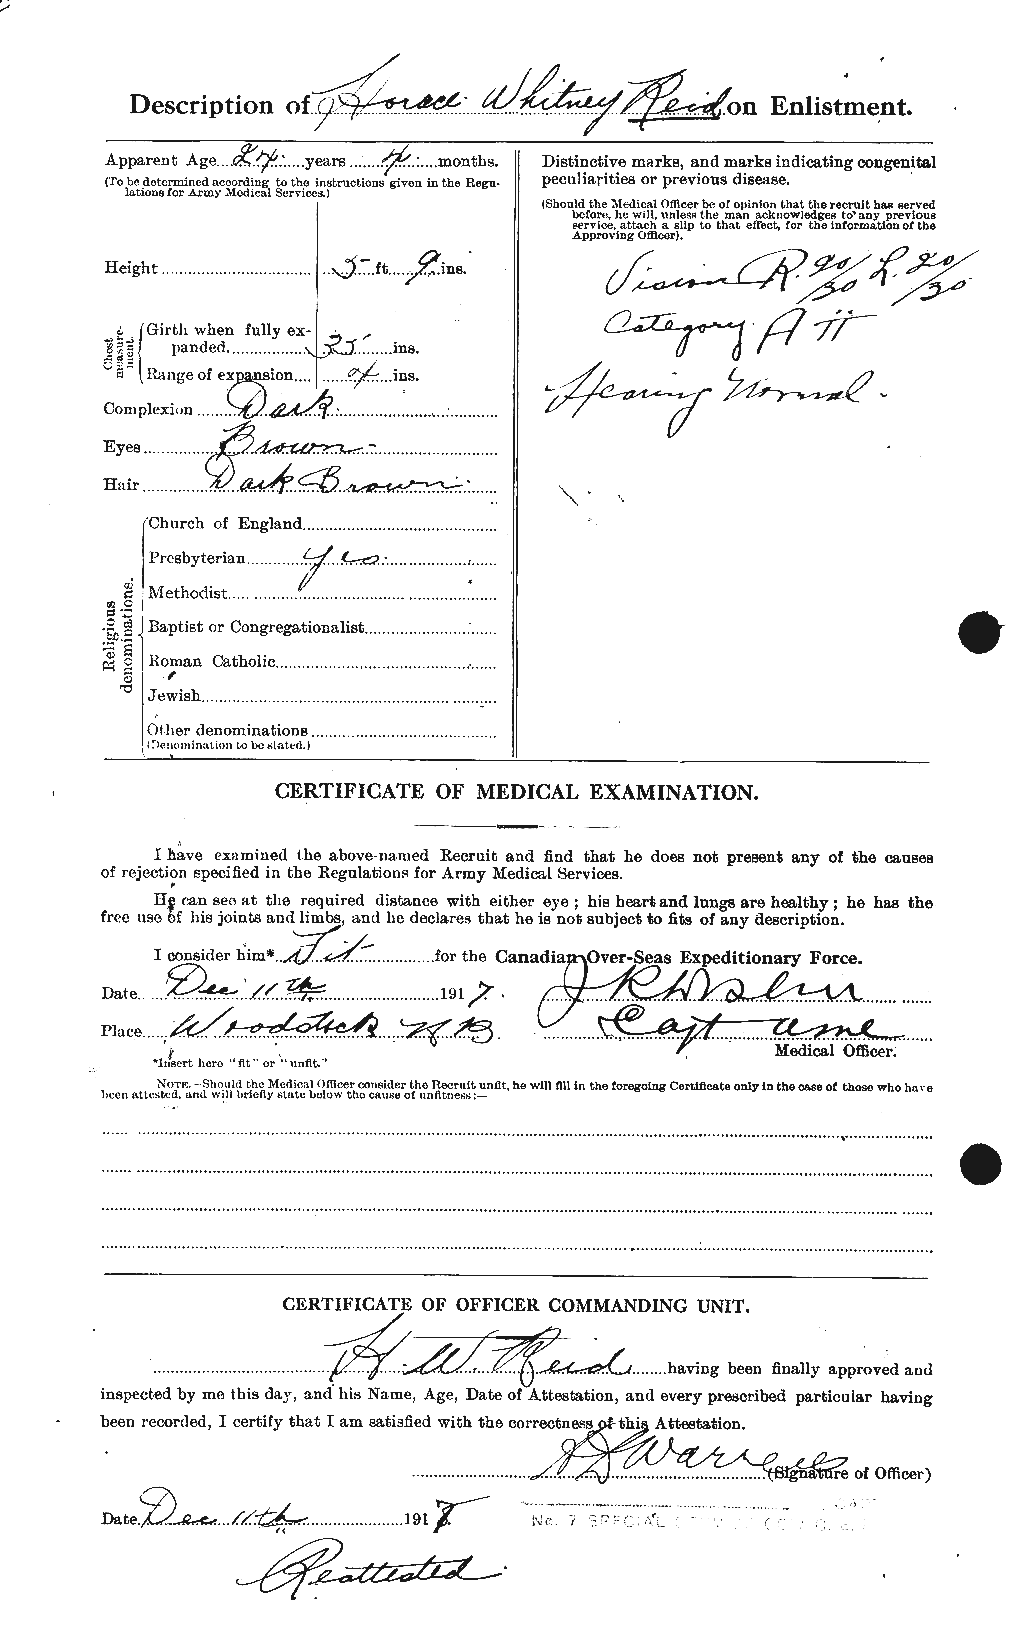 Personnel Records of the First World War - CEF 598613b